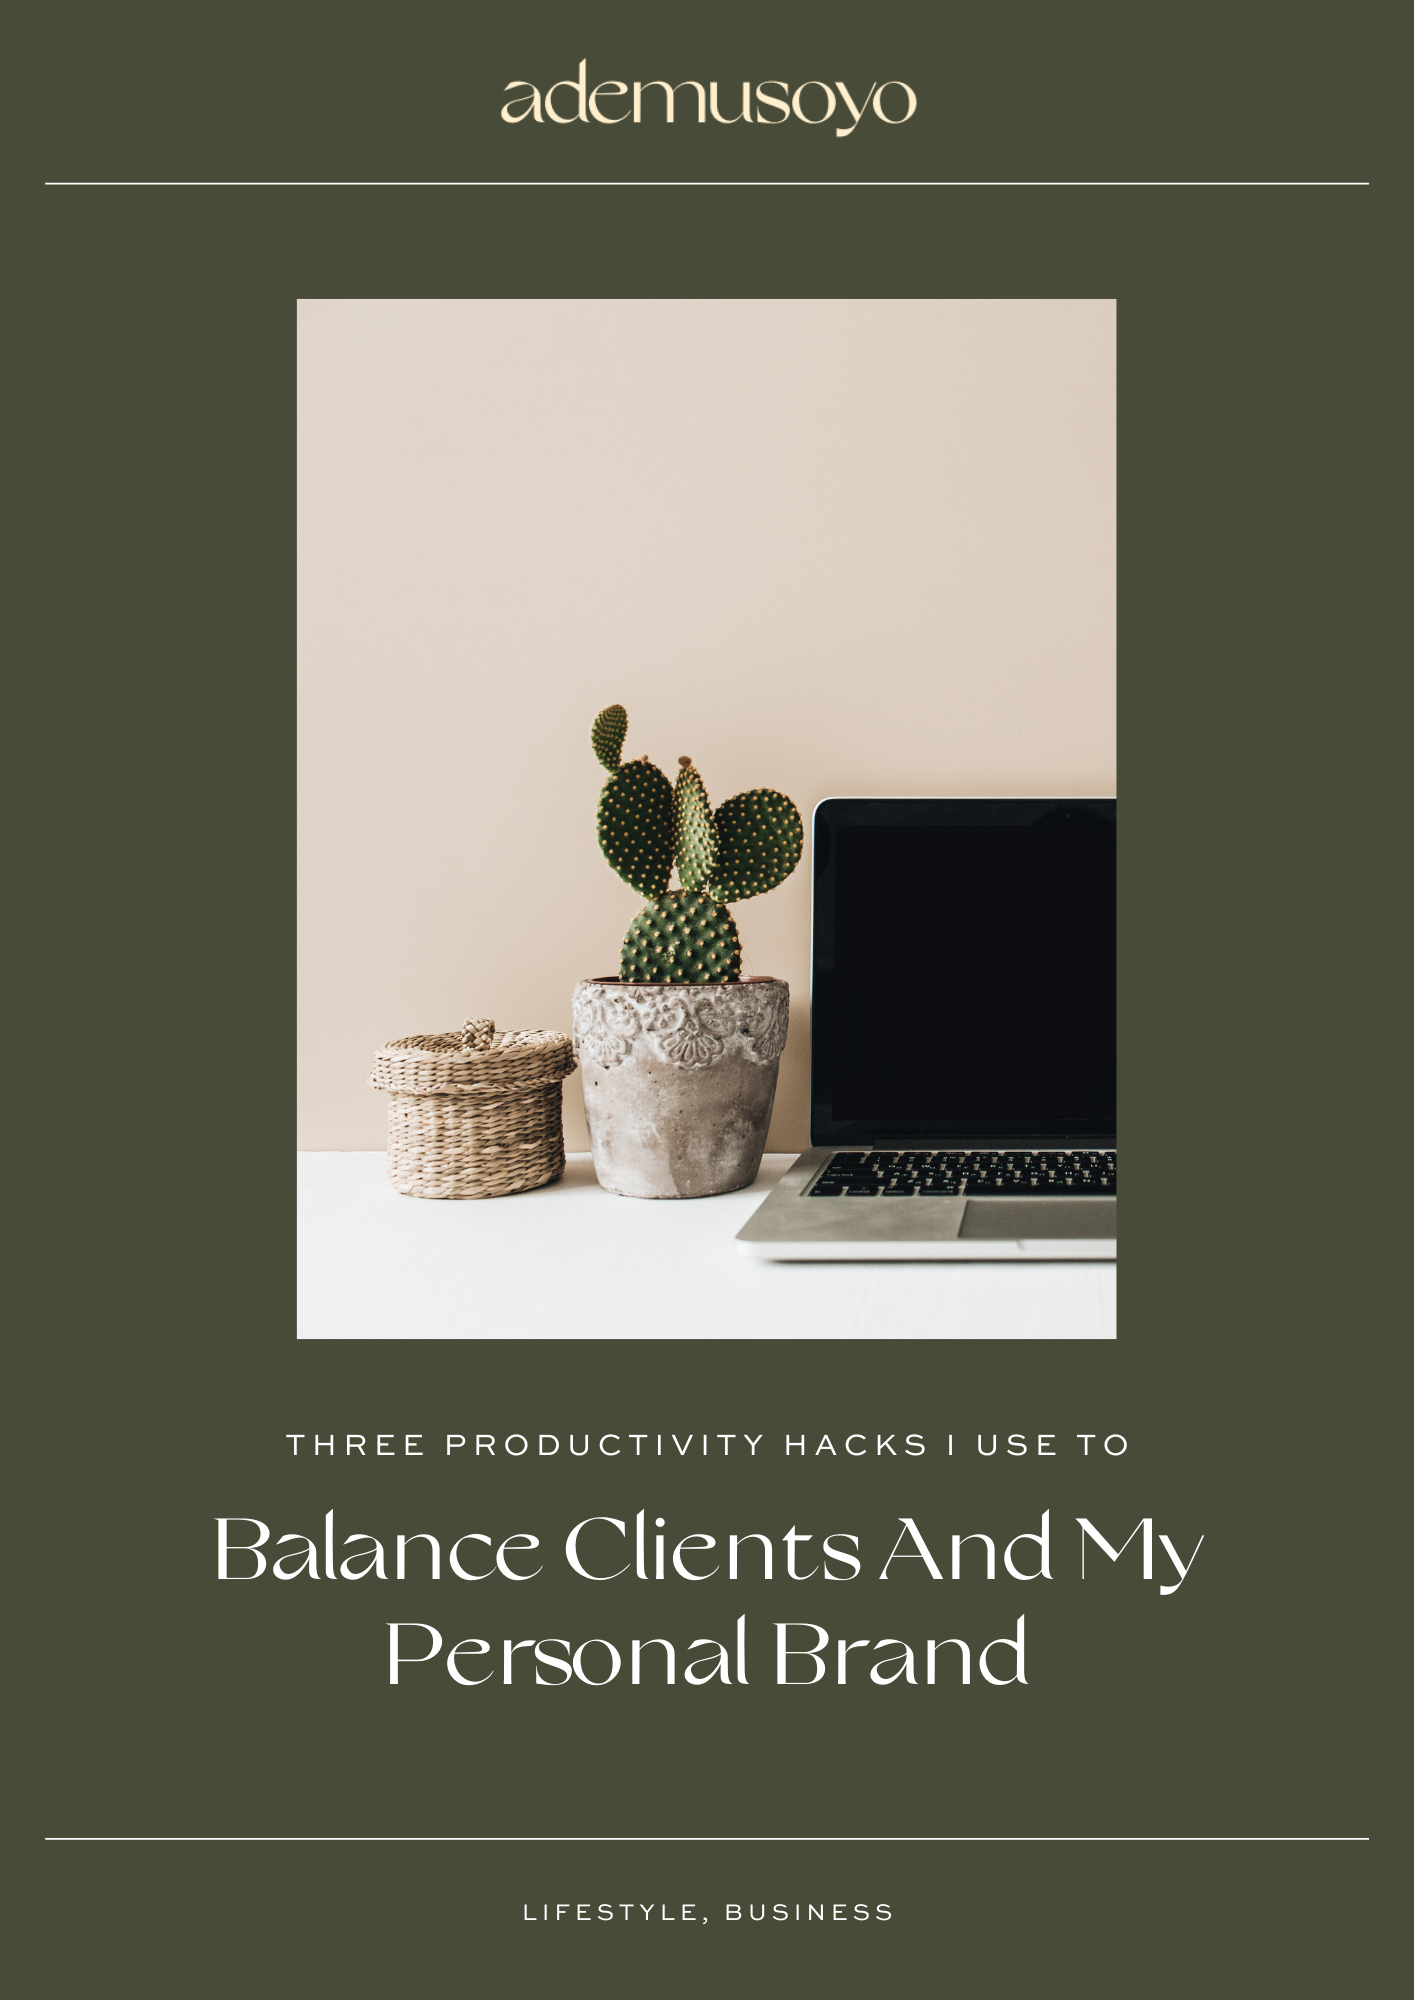 An olive green background with an image of a laptop and a small cactus on a clay pot planter beside it on top of a white desk with texts below it that says three productivity hacks i use to balance my clients and my personal brand.